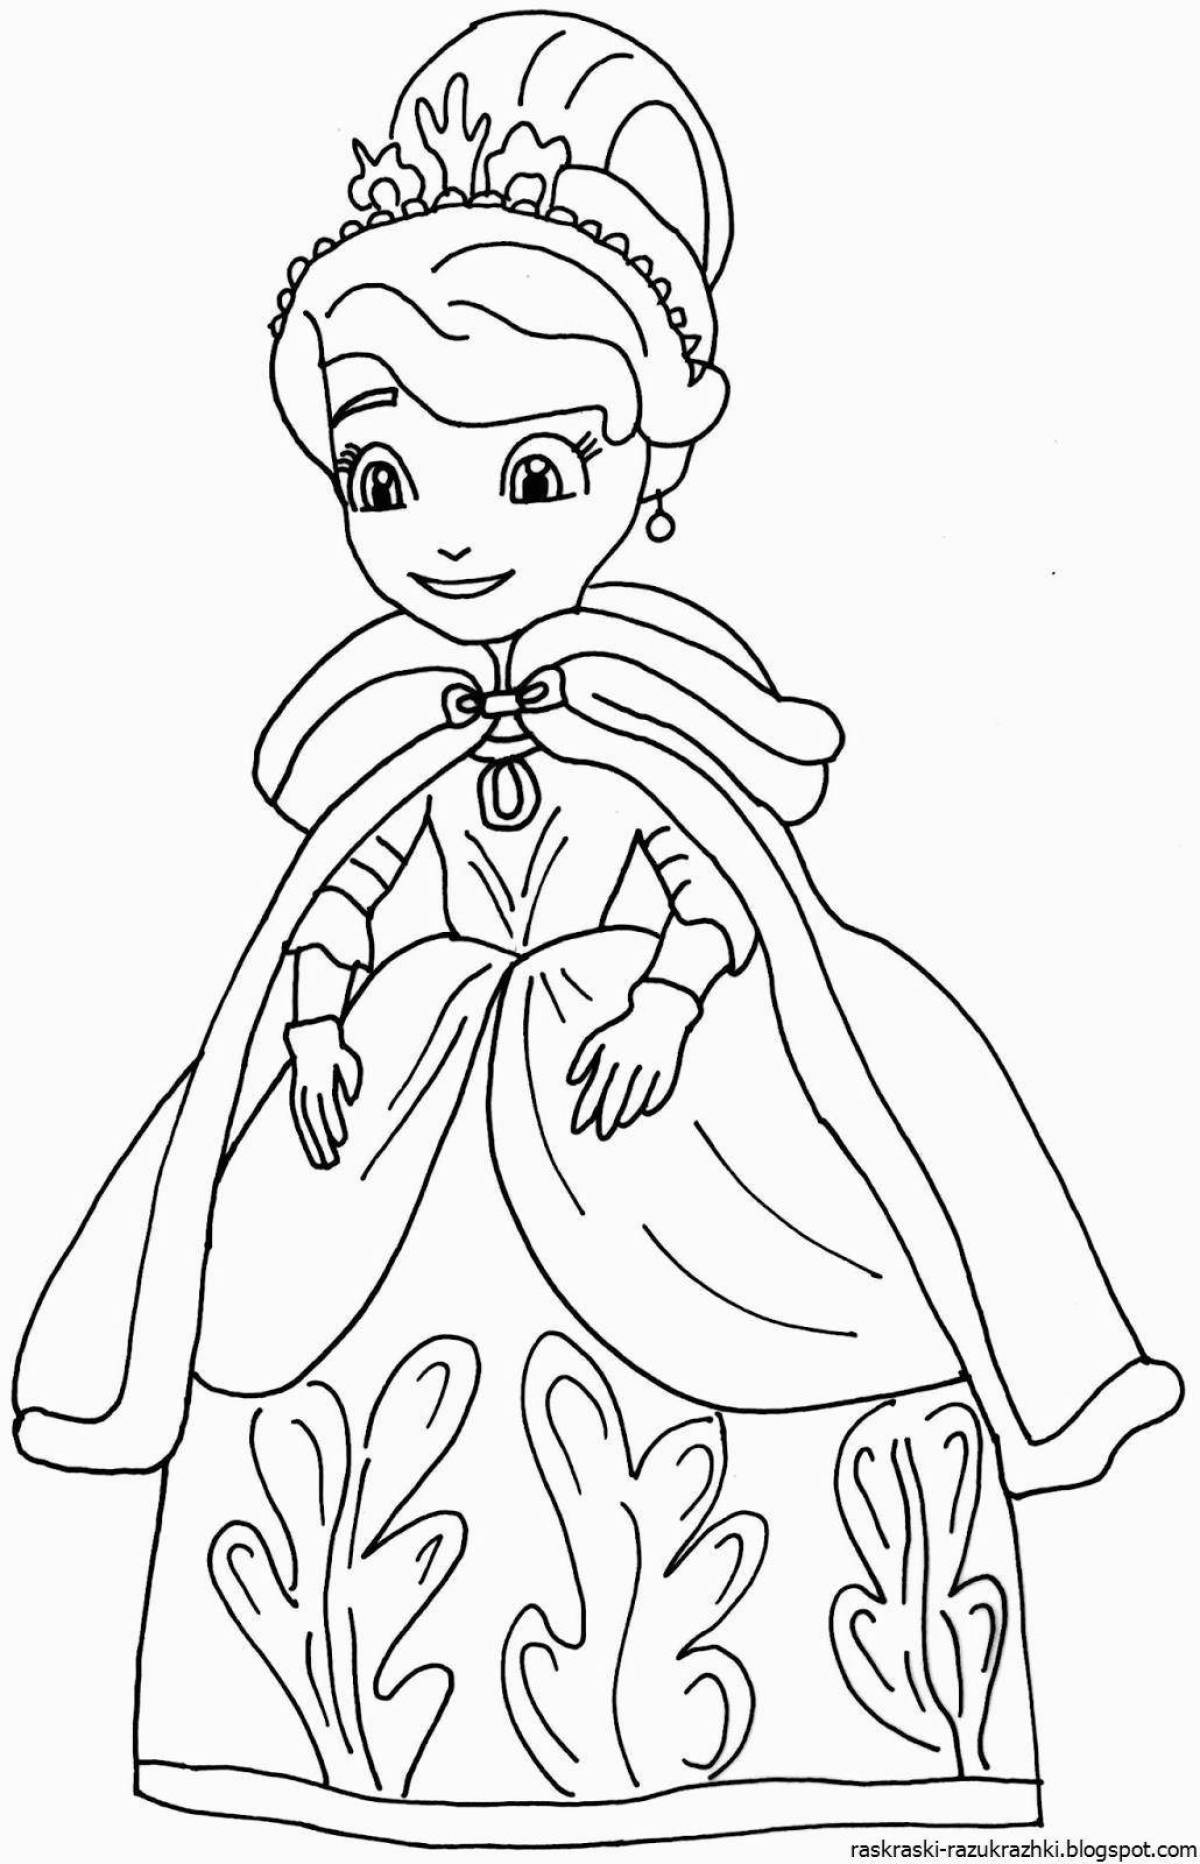 Cute princesses are preparing coloring pages